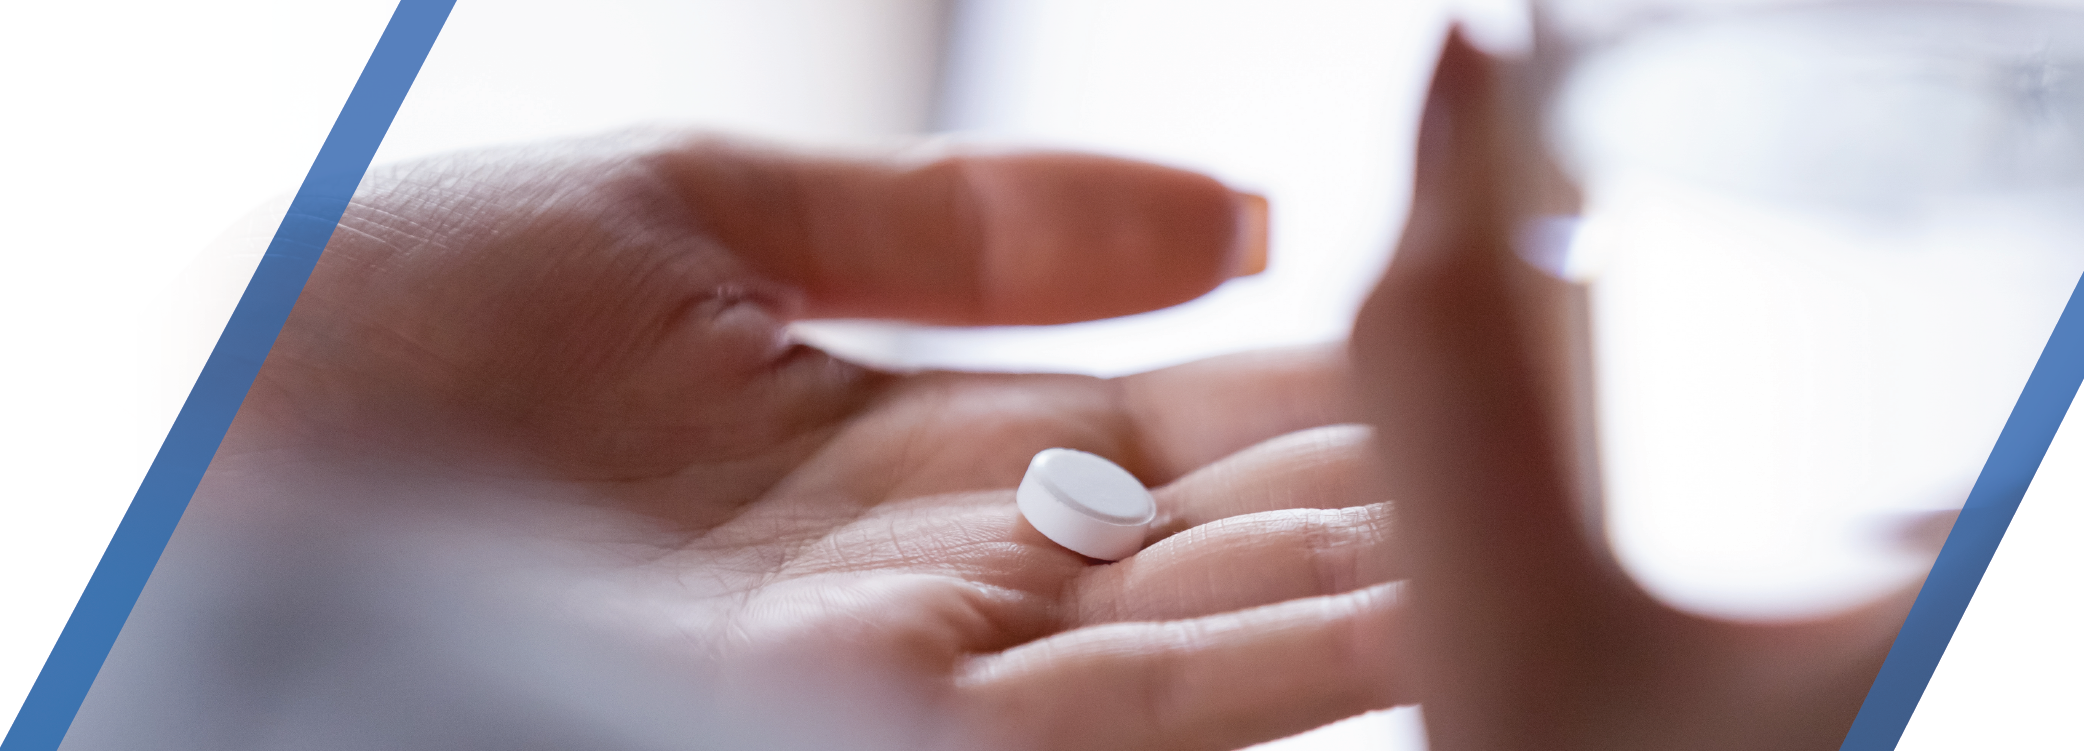 Contradictory Court Opinions Leave the Approval of Abortion Medication in Question